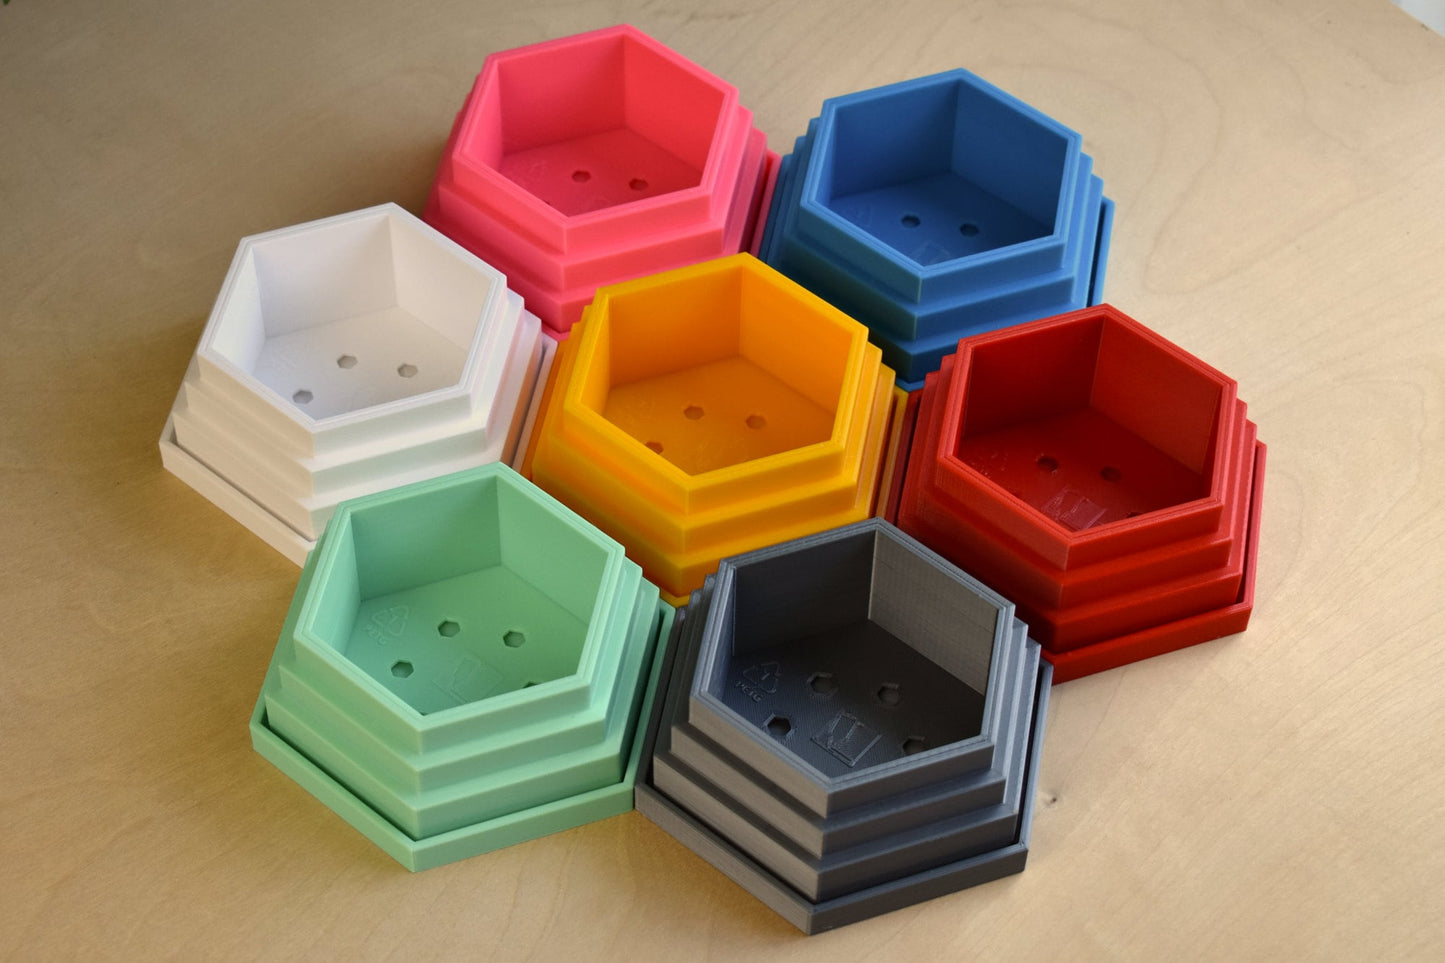 Small Hexagon Planter with Tray